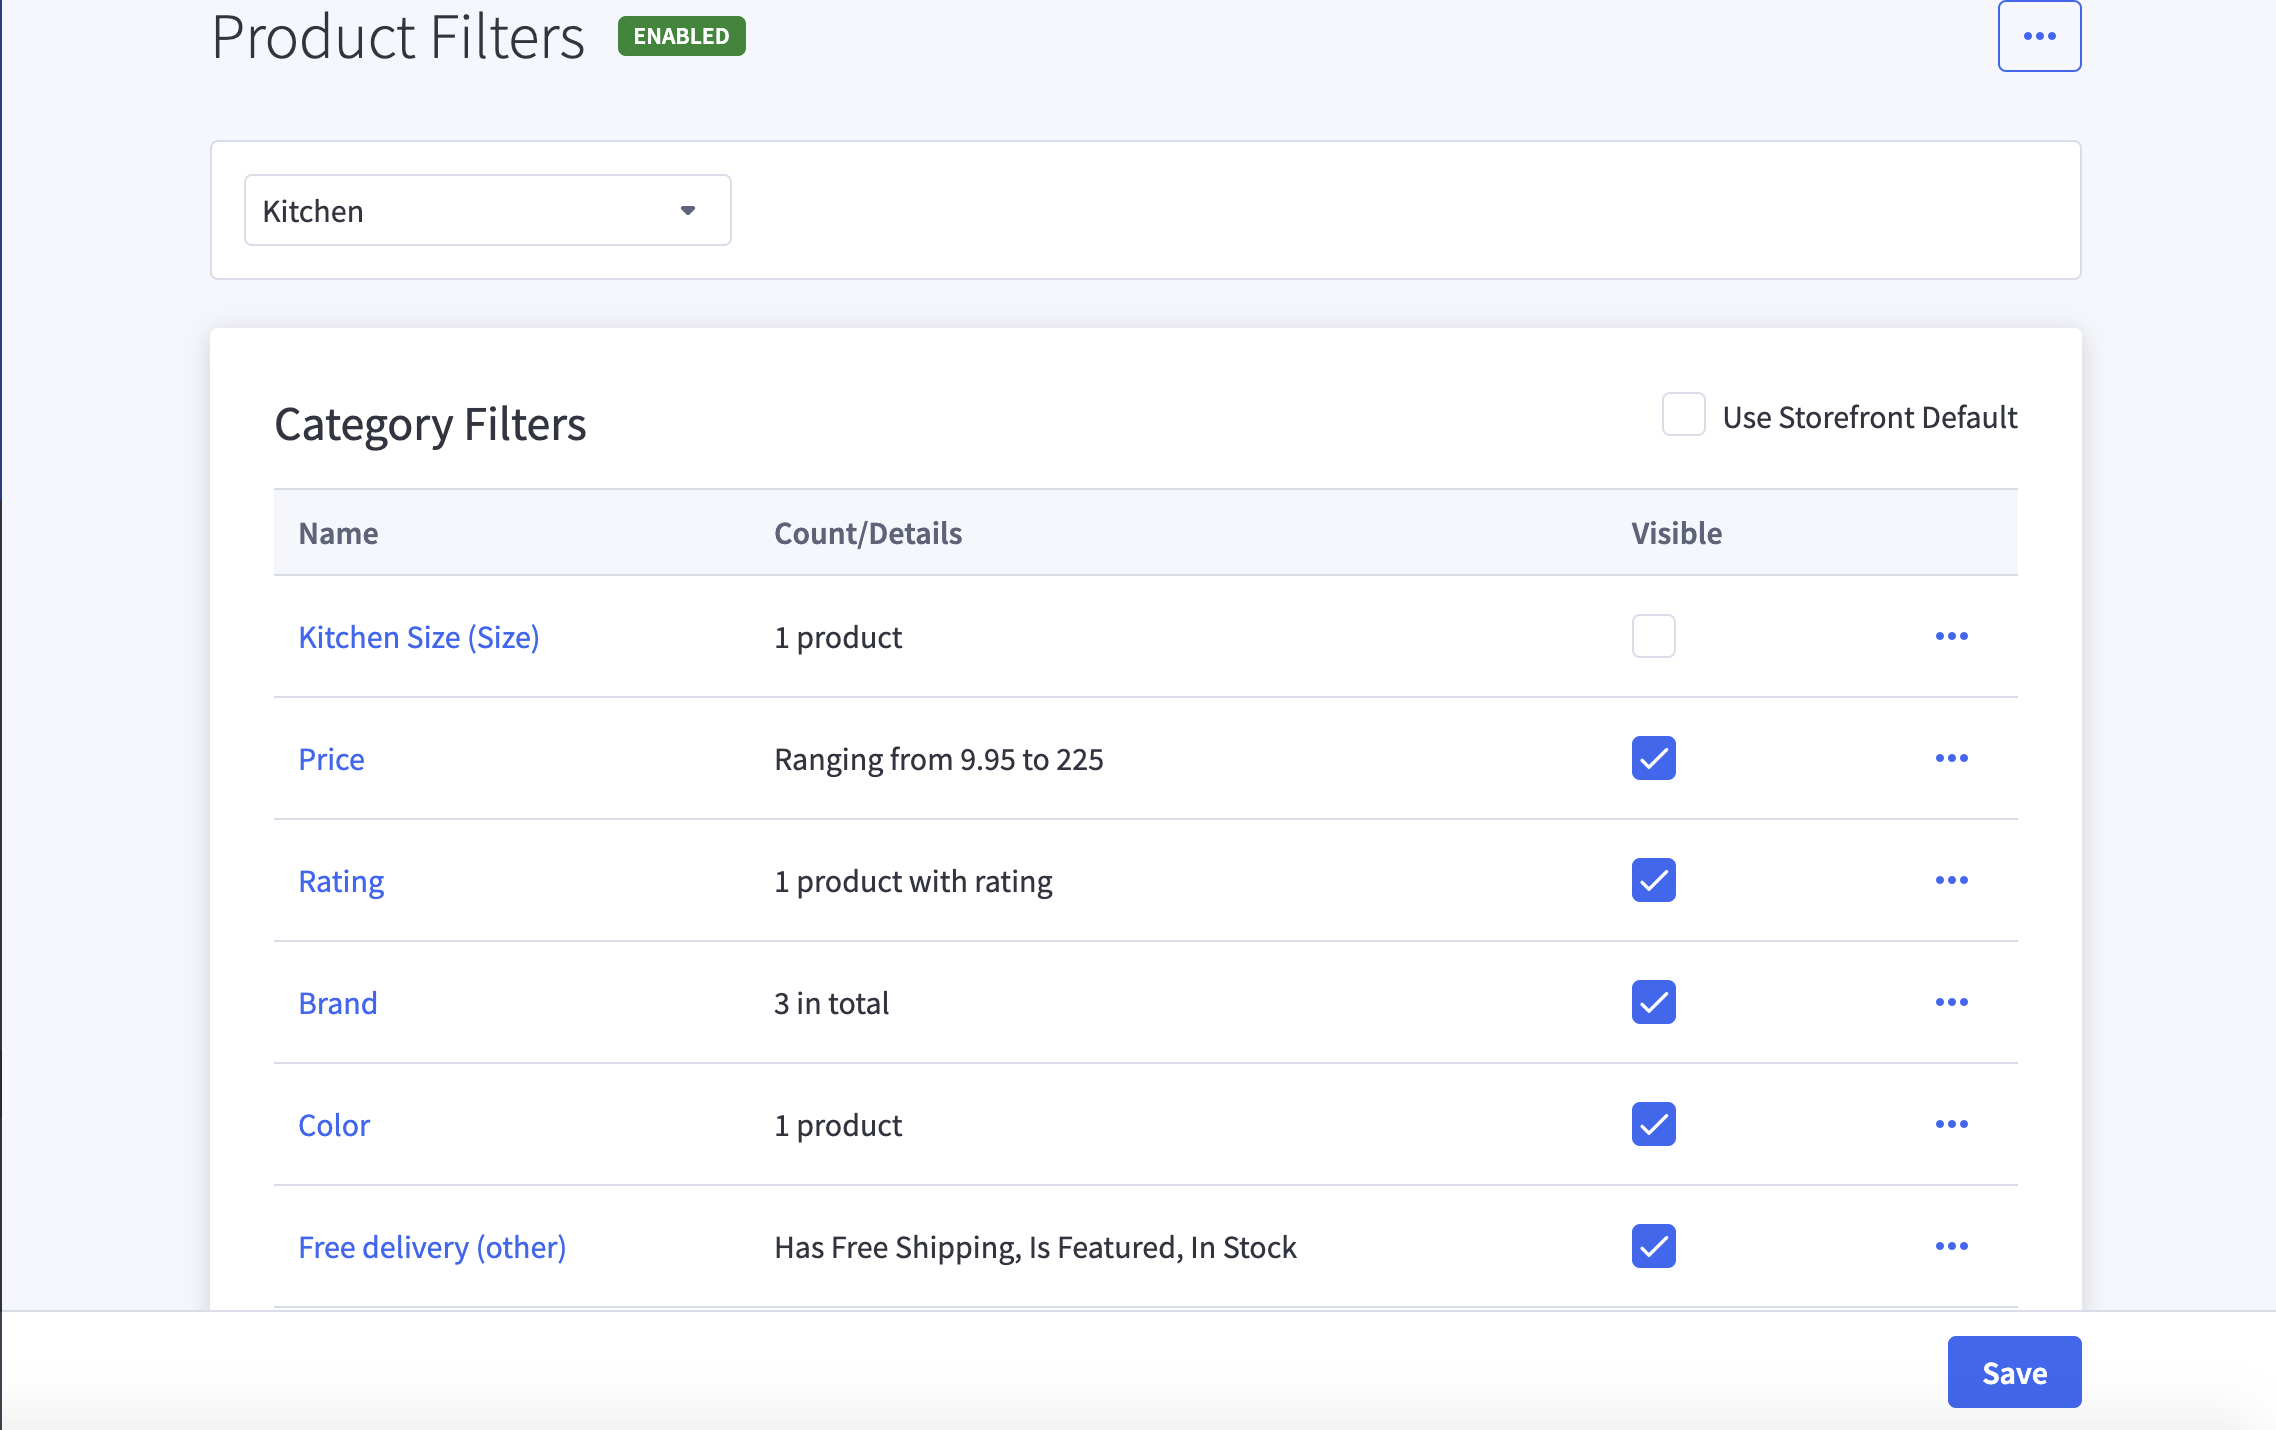 Category Filters